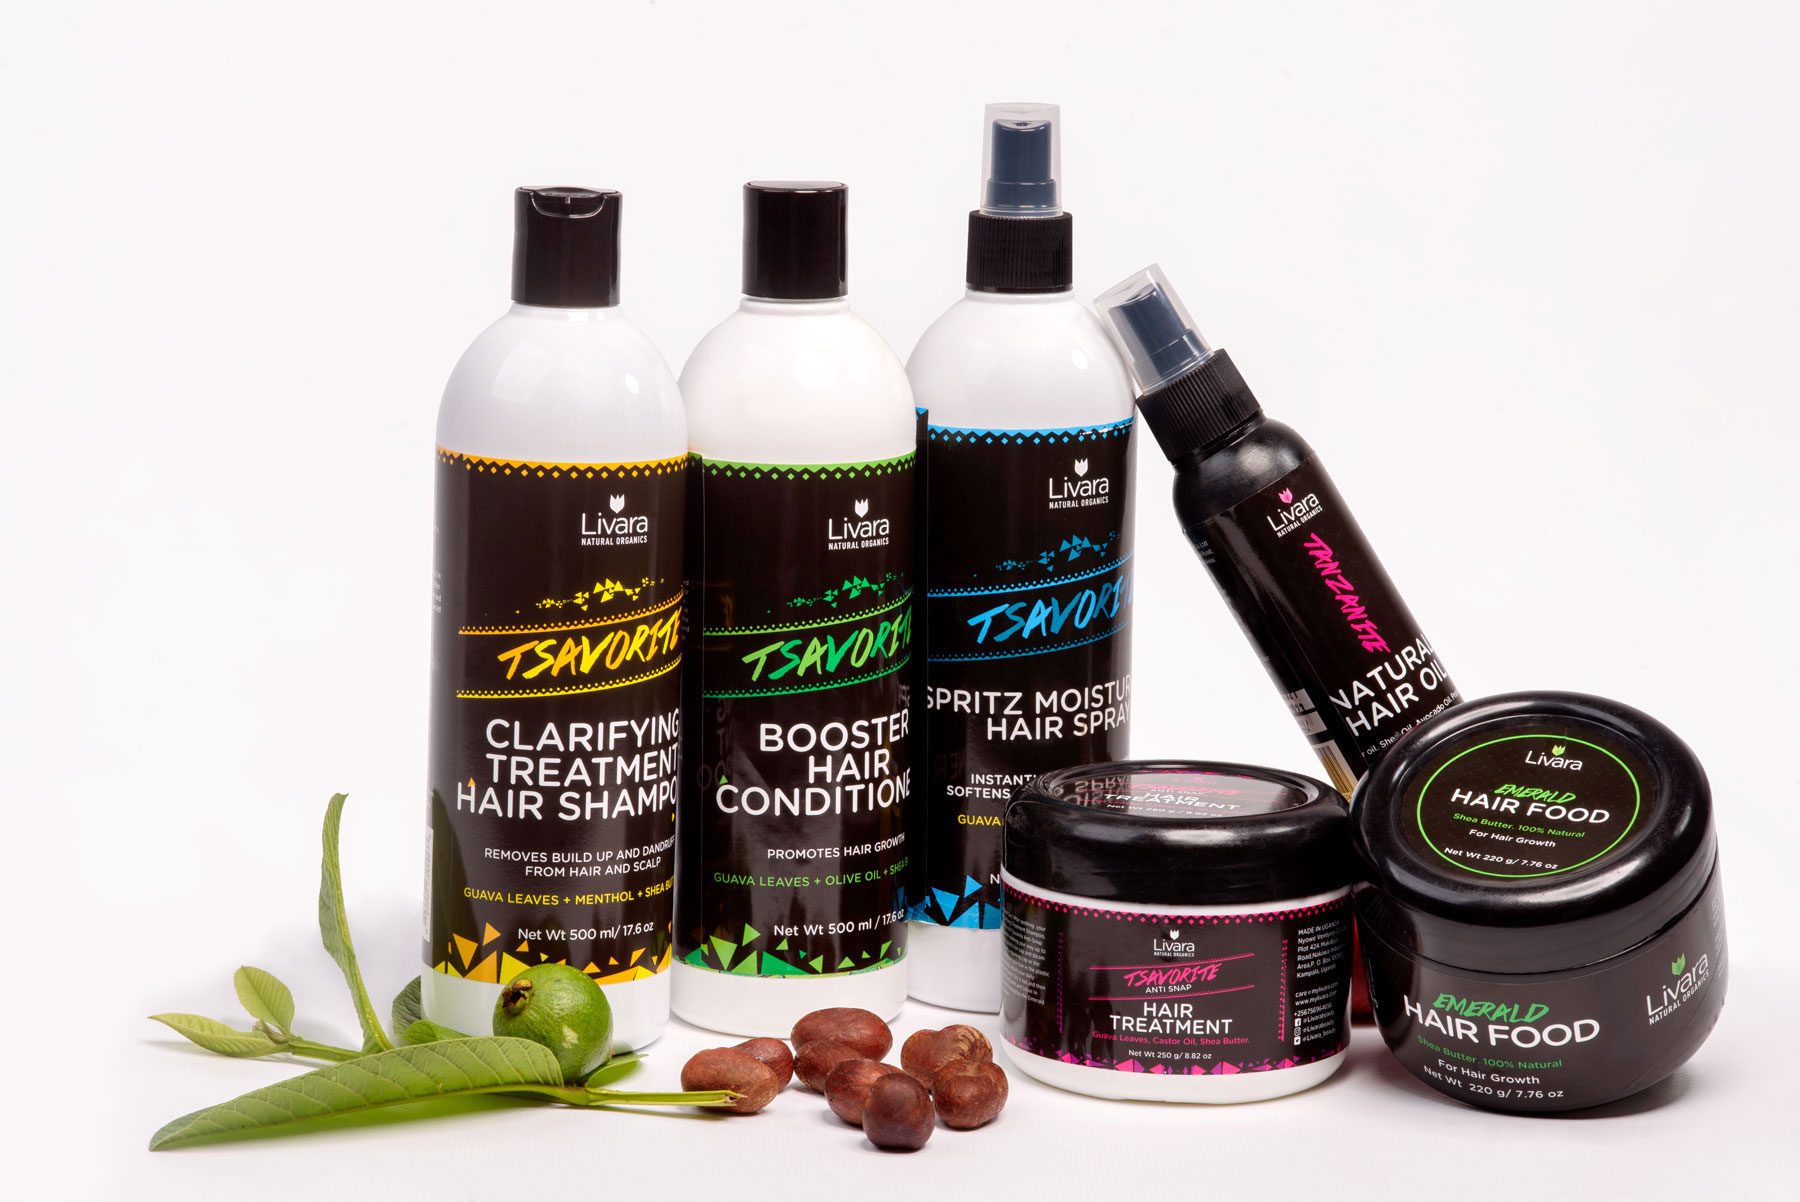 Why Livara's Tsavorite Product Line with Guava Leaf Extracts is Great for  Hair Growth - Livara Natural Organics